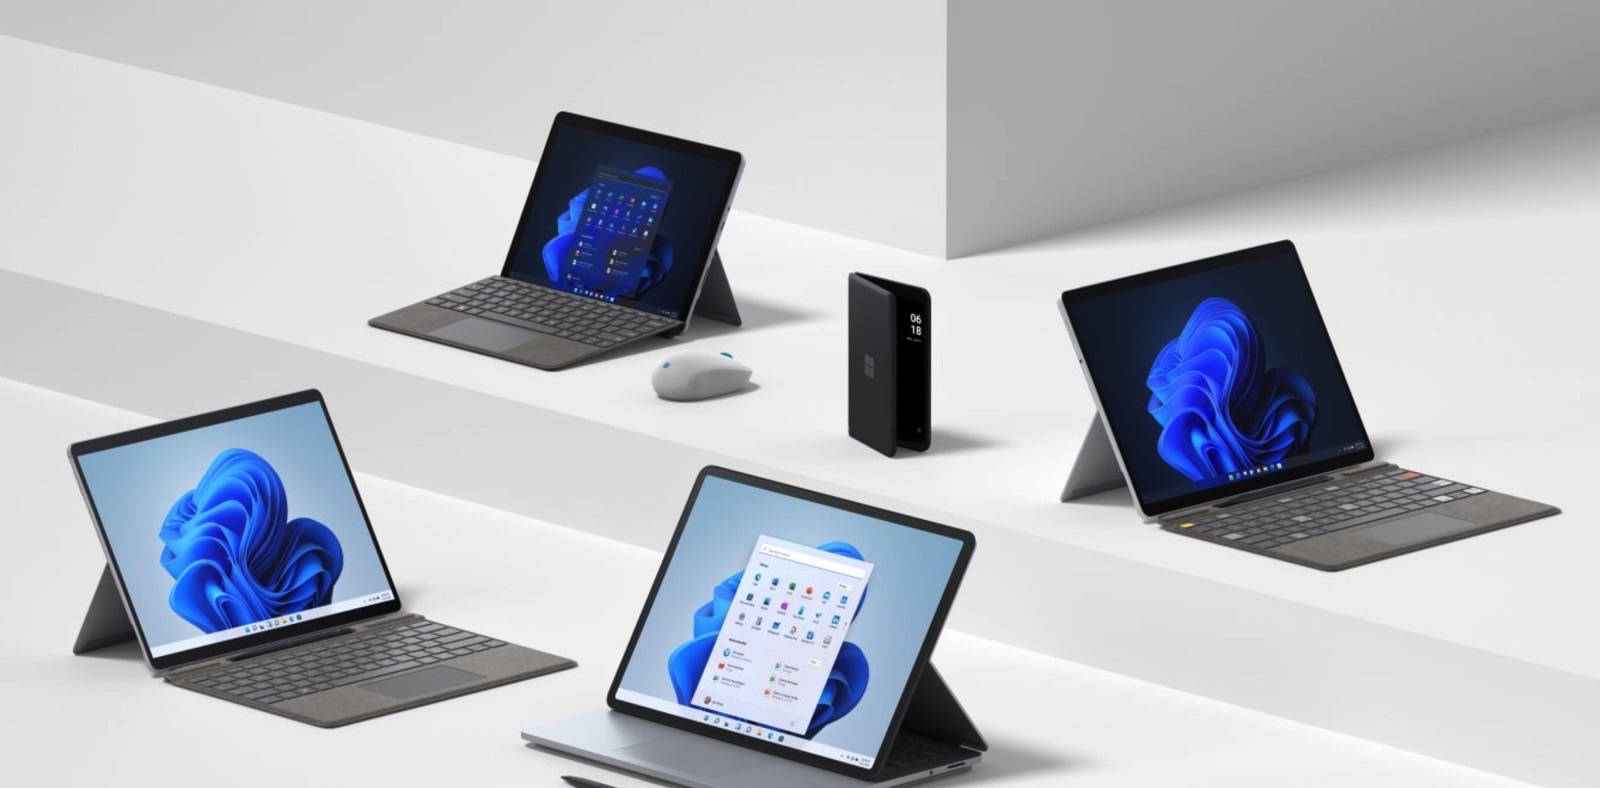 Private: Microsoft’s reveals new Surface lineup just in time for Windows 11